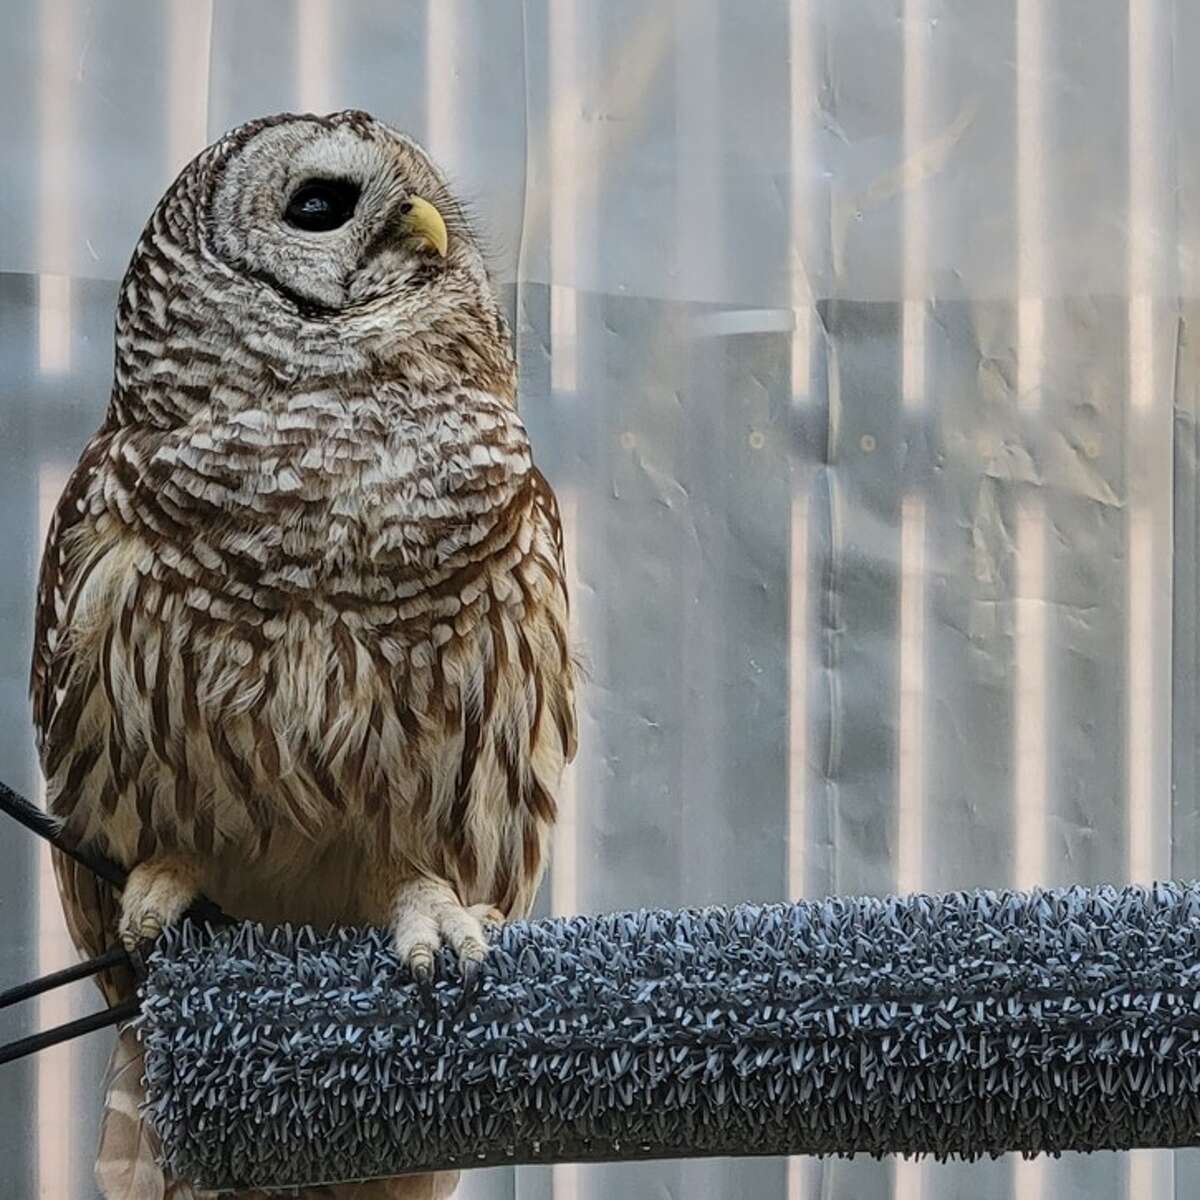 A barred owl injured in Manistee County is set for release in Wellston on Jan. 13.